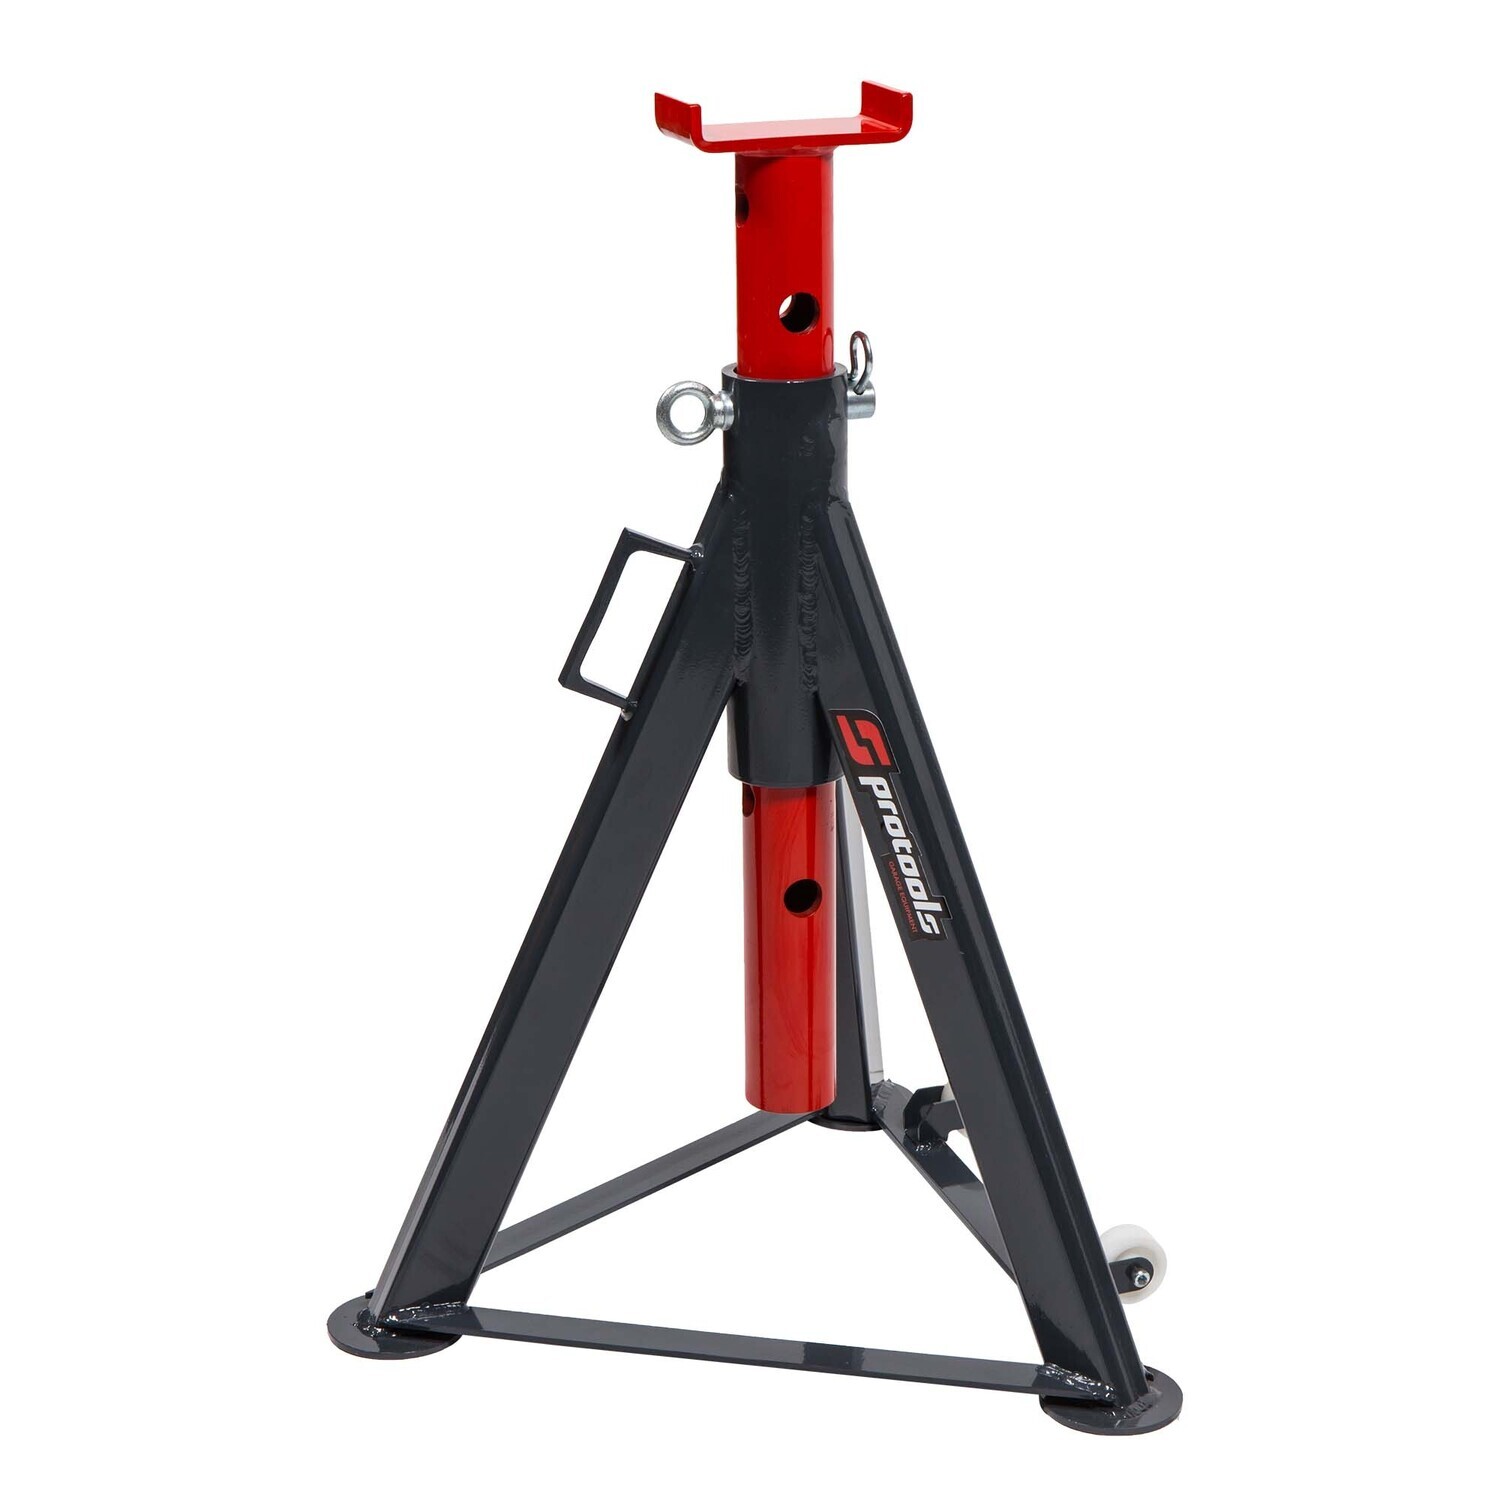 PJS005.695.1 Axle stand - Capacity 5 t